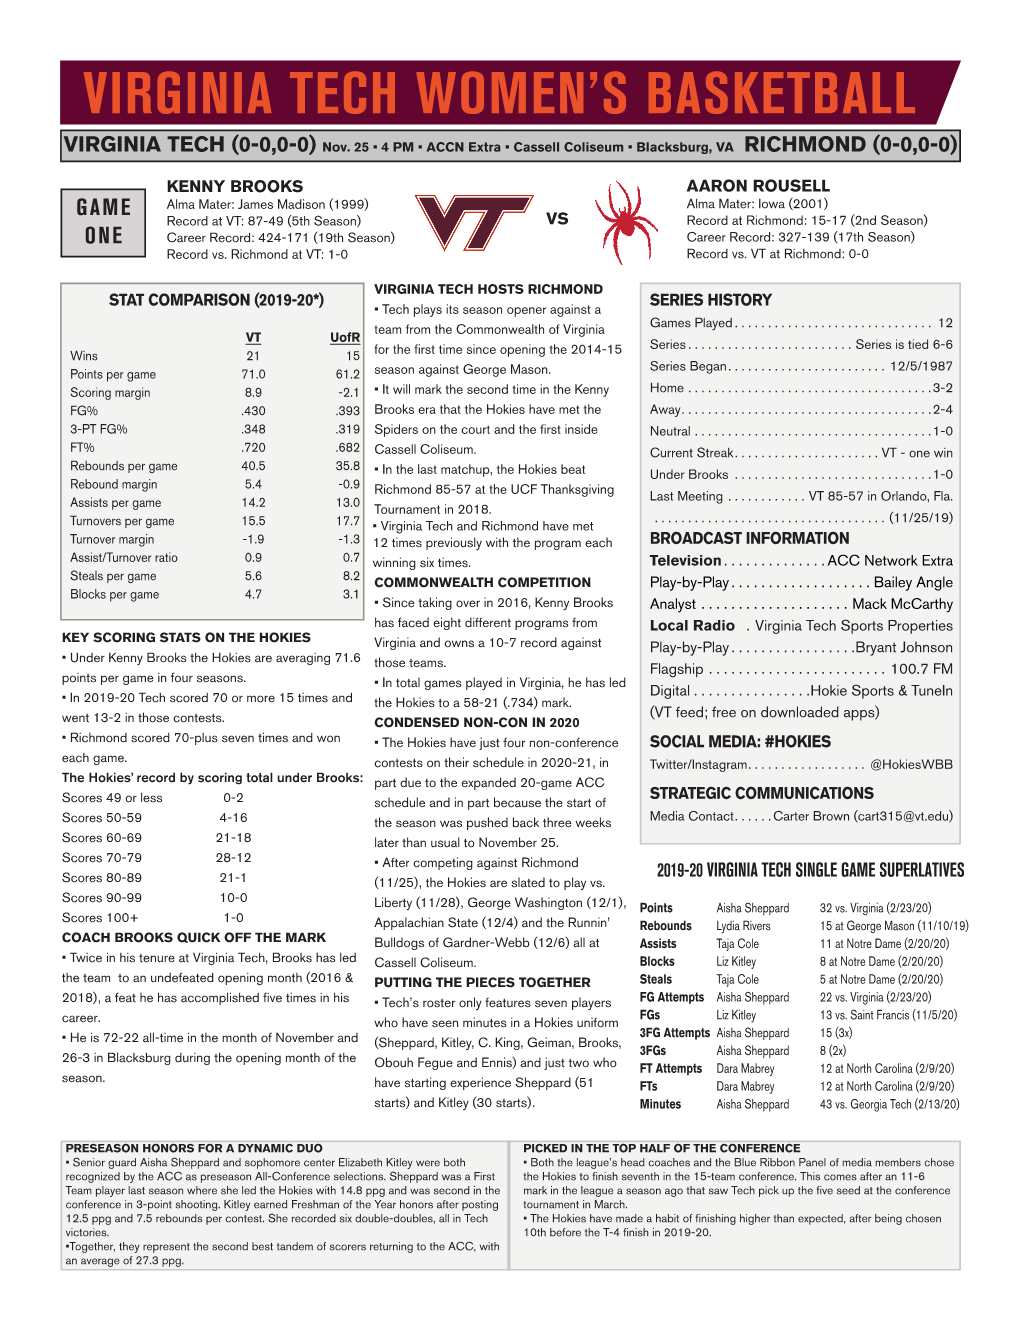 Virginia Tech Women's Basketball Page 1/1 Combined Team Statistics As of Mar 11, 2020 All Games